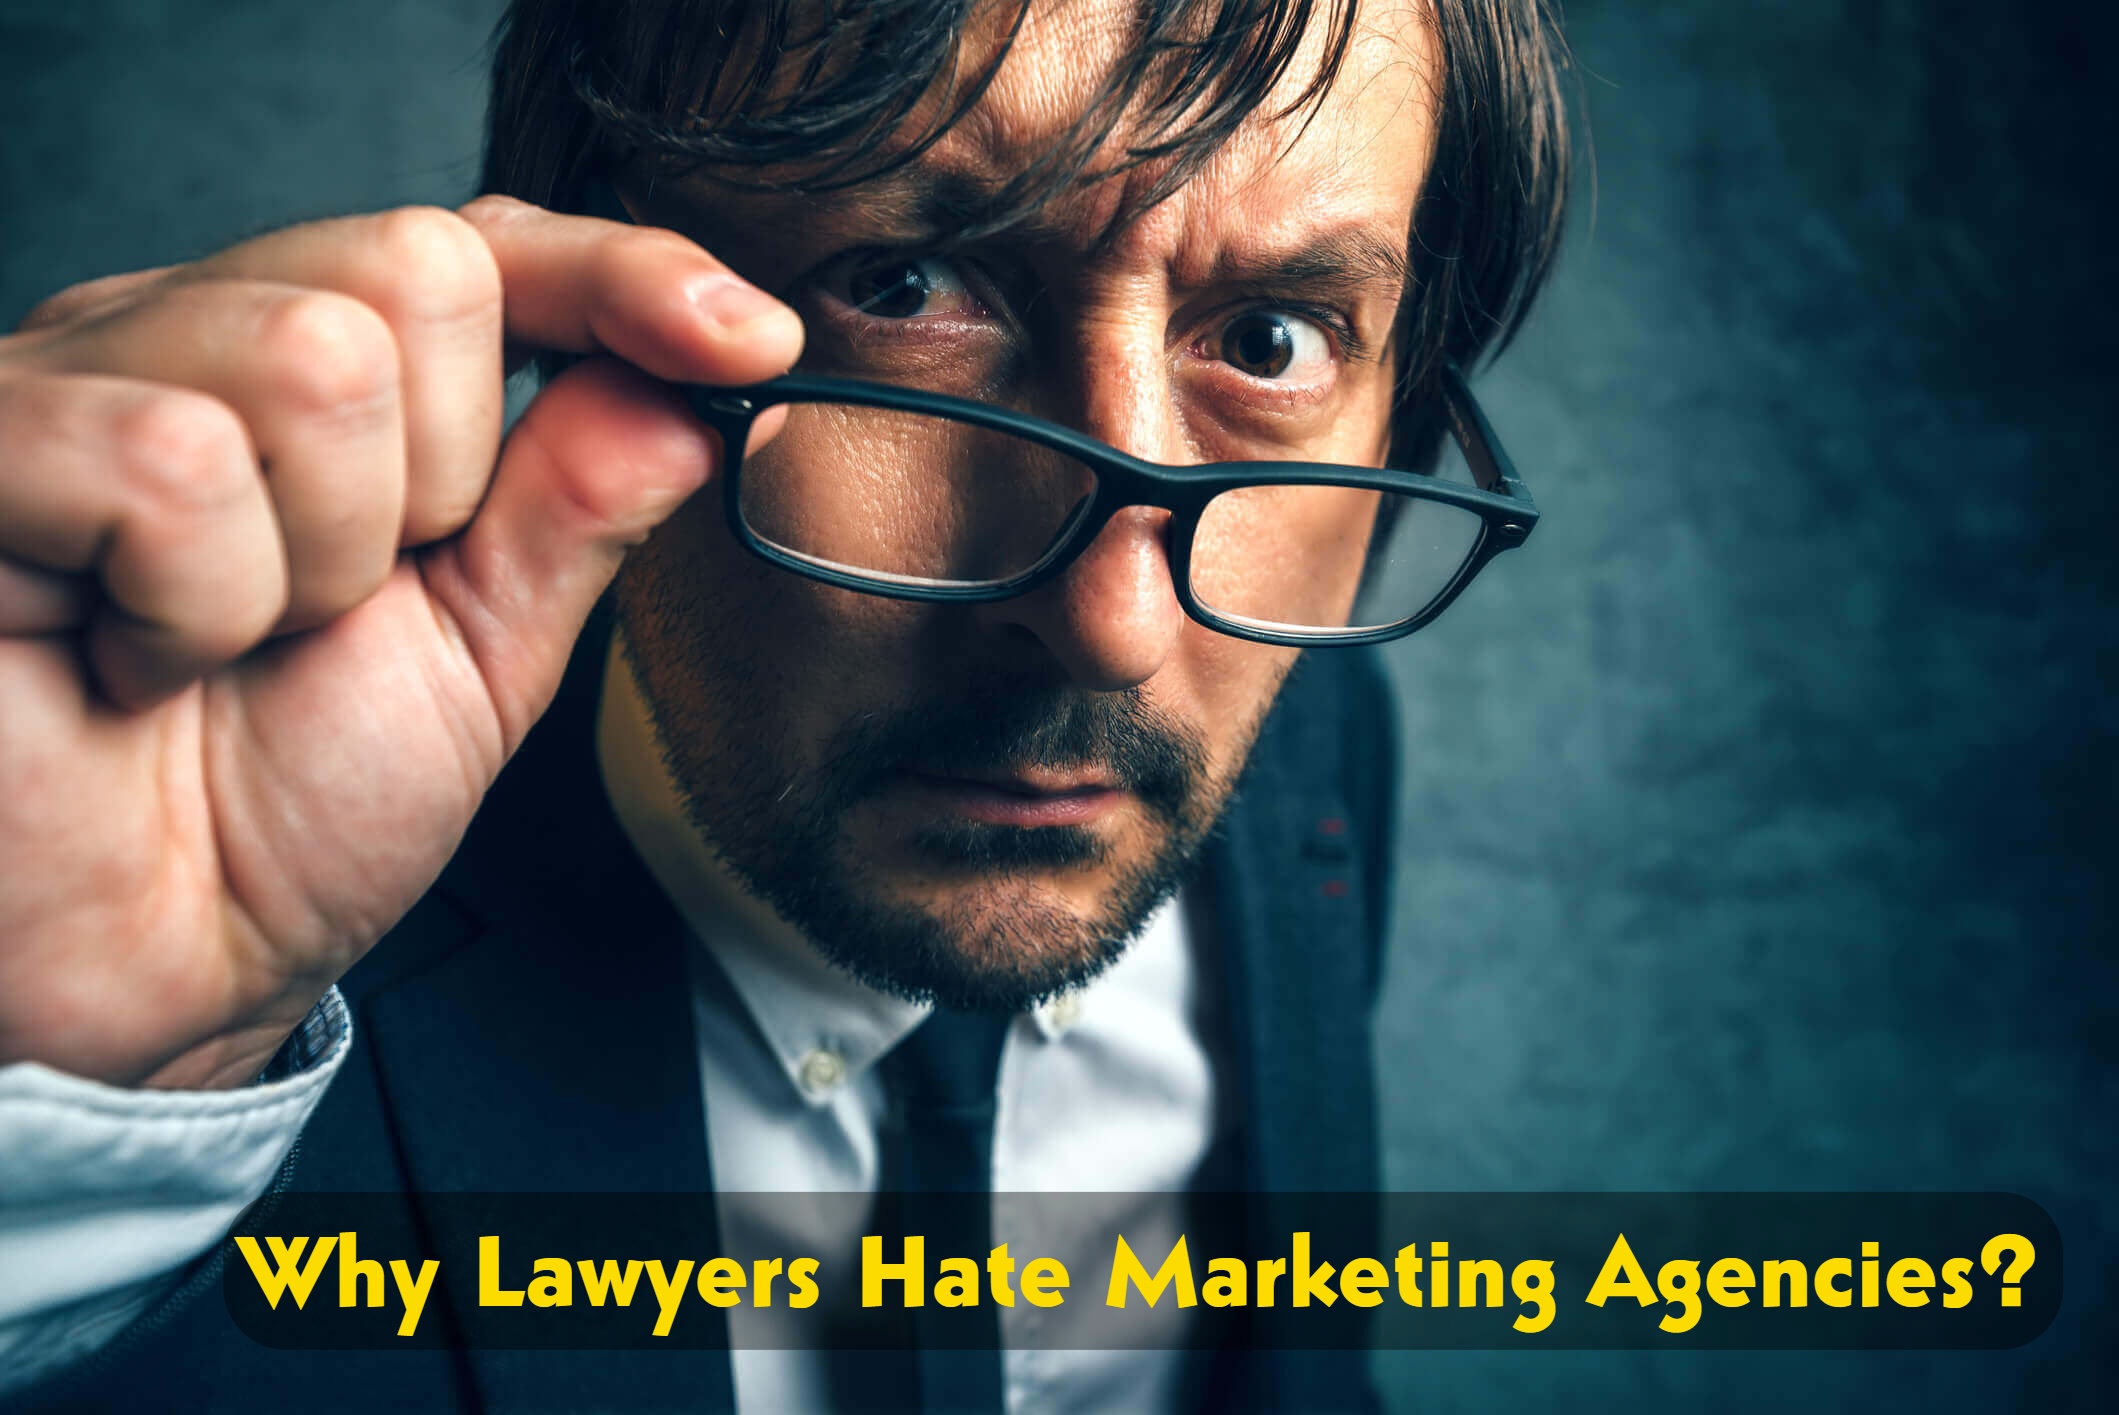 Why lawyers hate marketing agencies